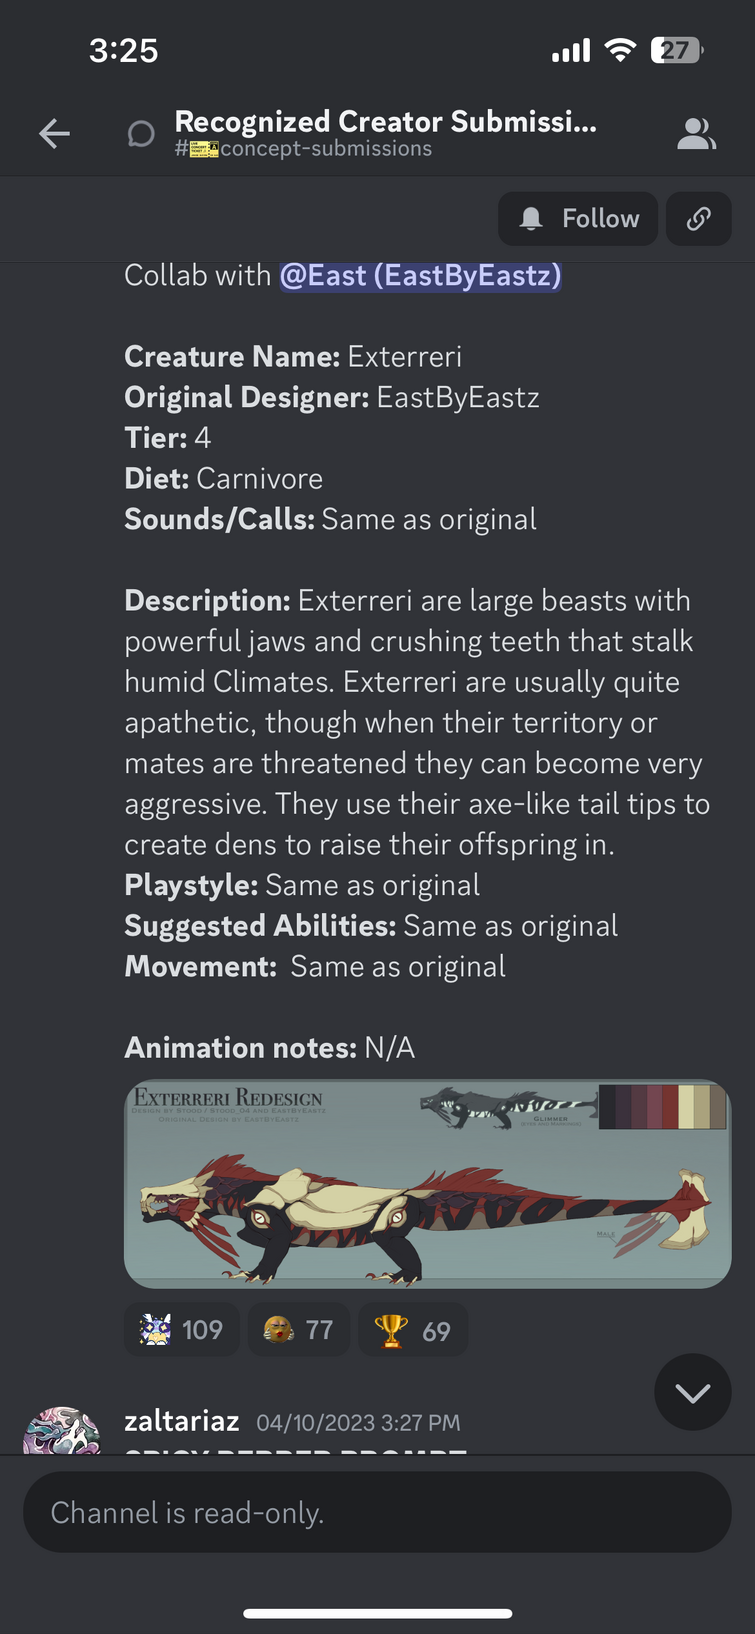 a redesign submission I found on discord (disclaimer: unofficial)